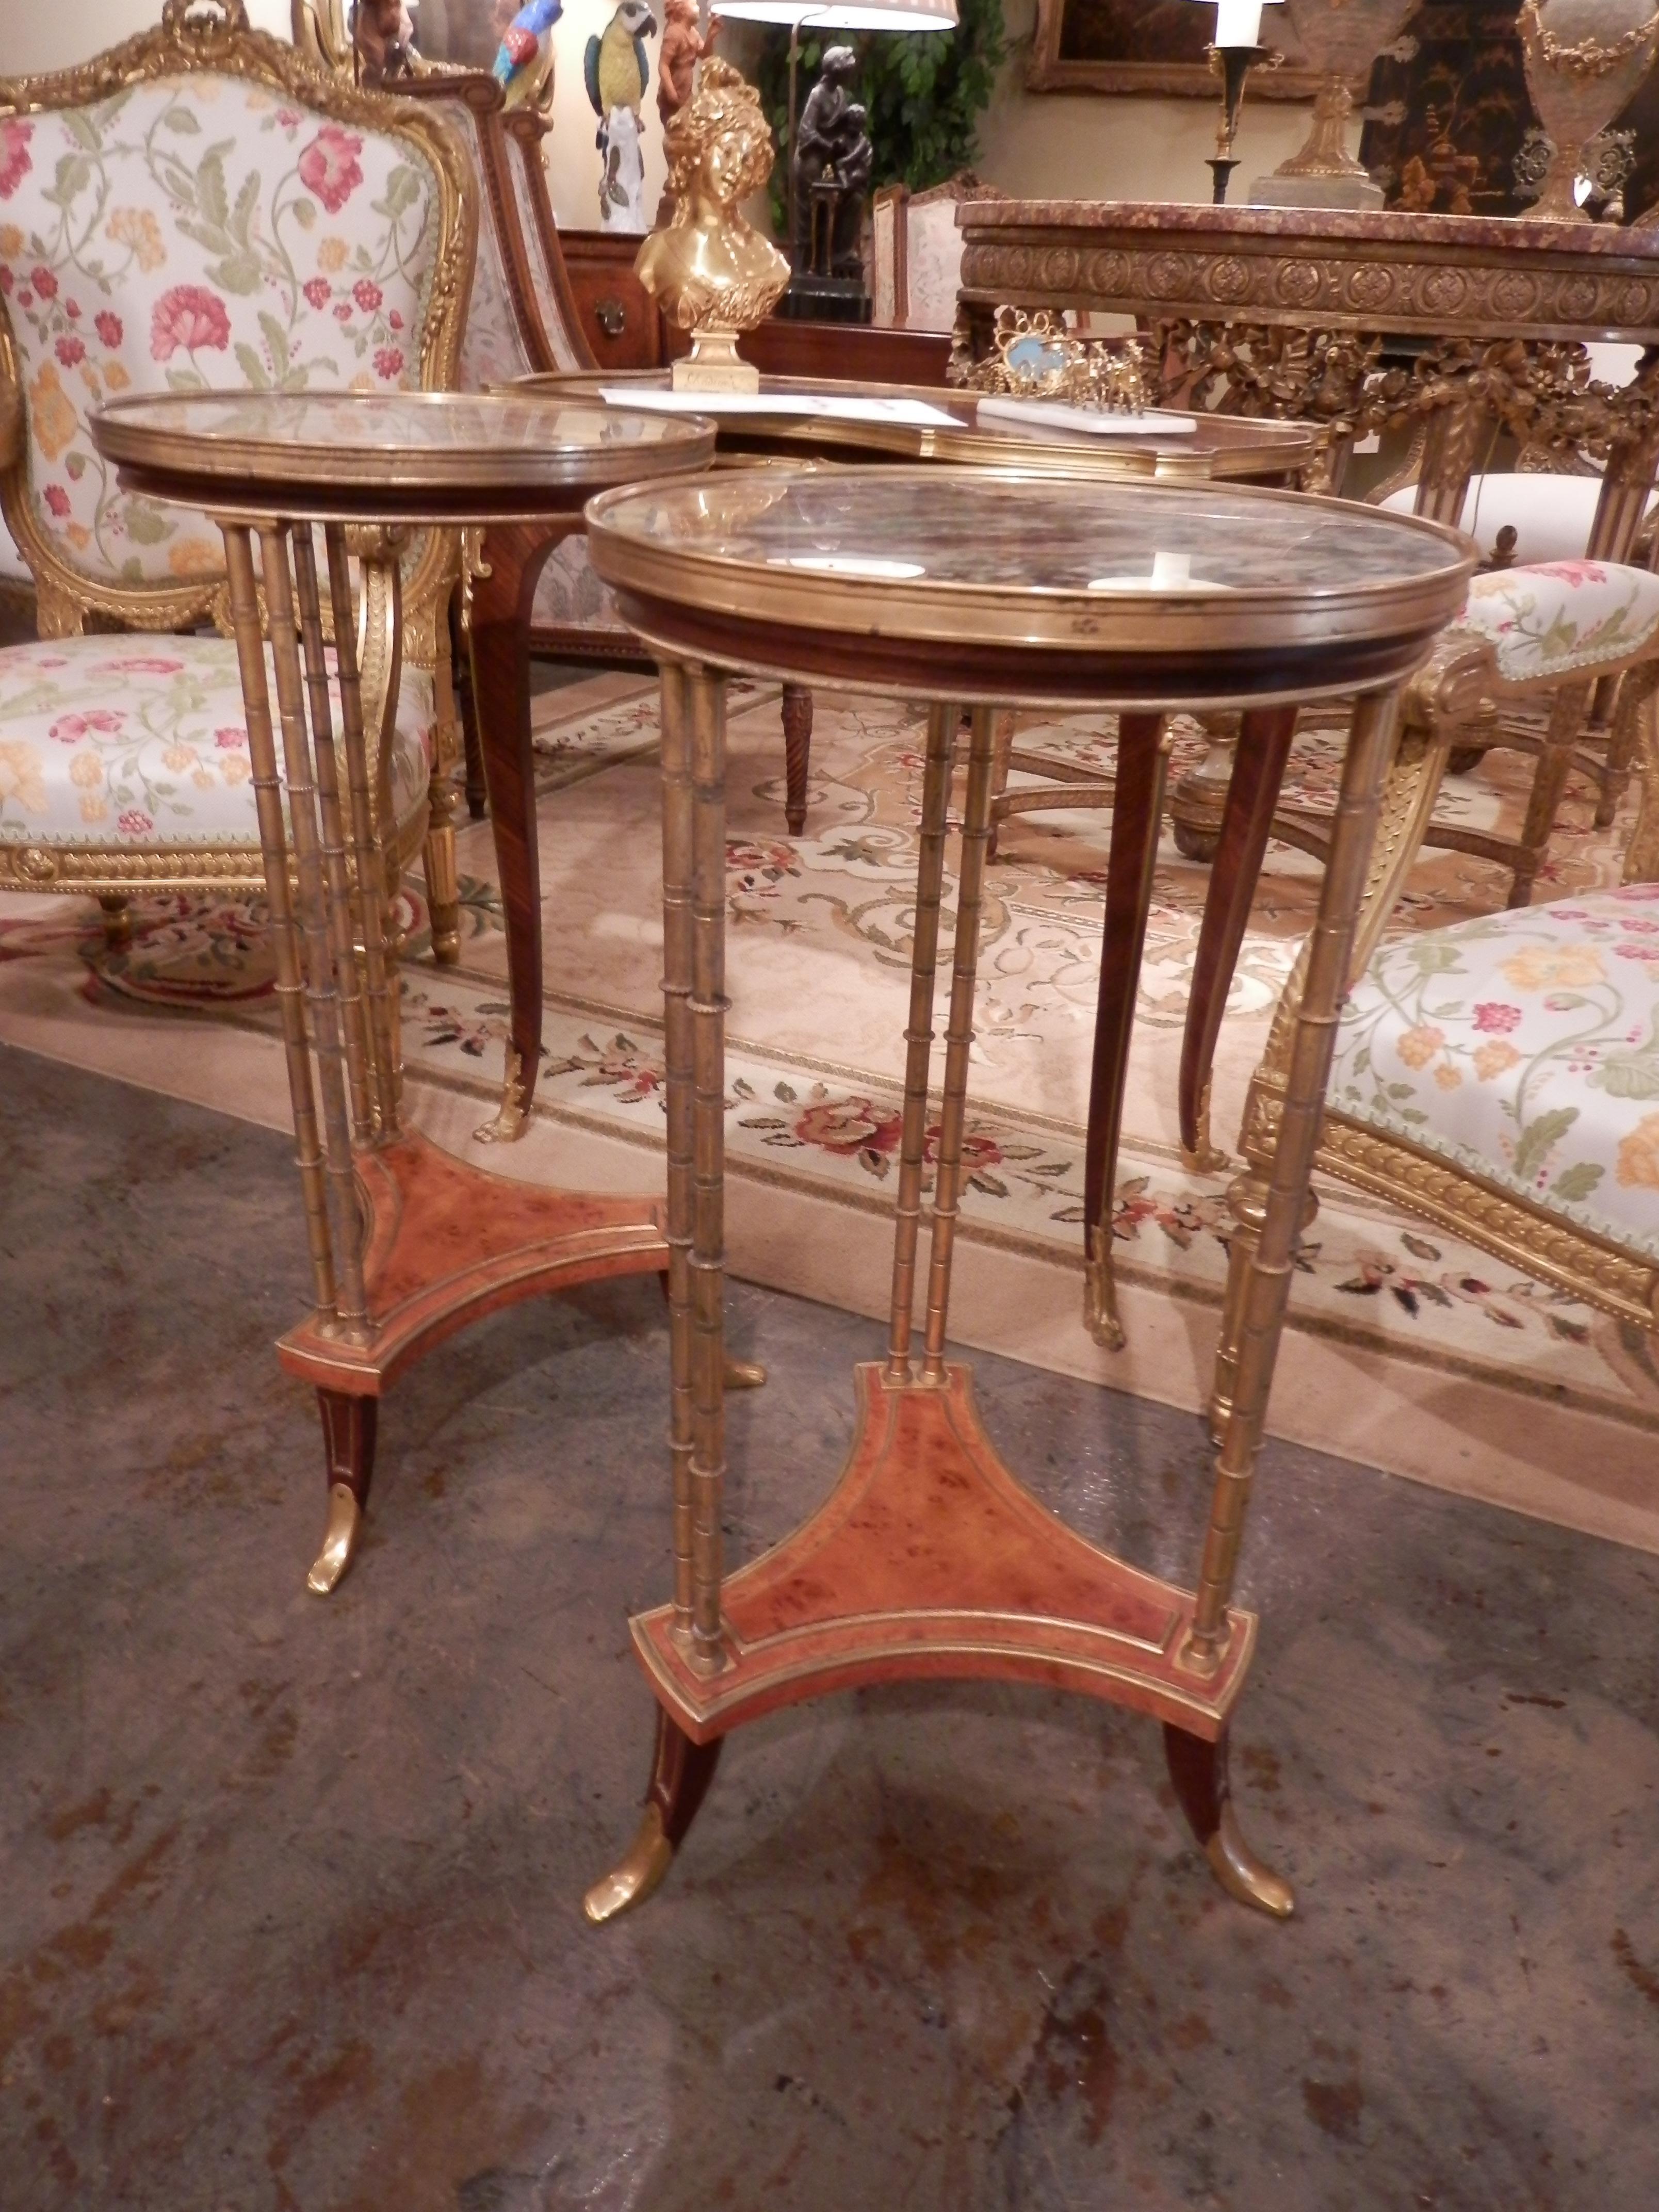 A beautiful pair of early 20th century French Louis XVI marble-top and gilt bronze gueridon tables. Based on a design by Adam Weisweller. These tables are rare to come by and this pair is in excellent condition